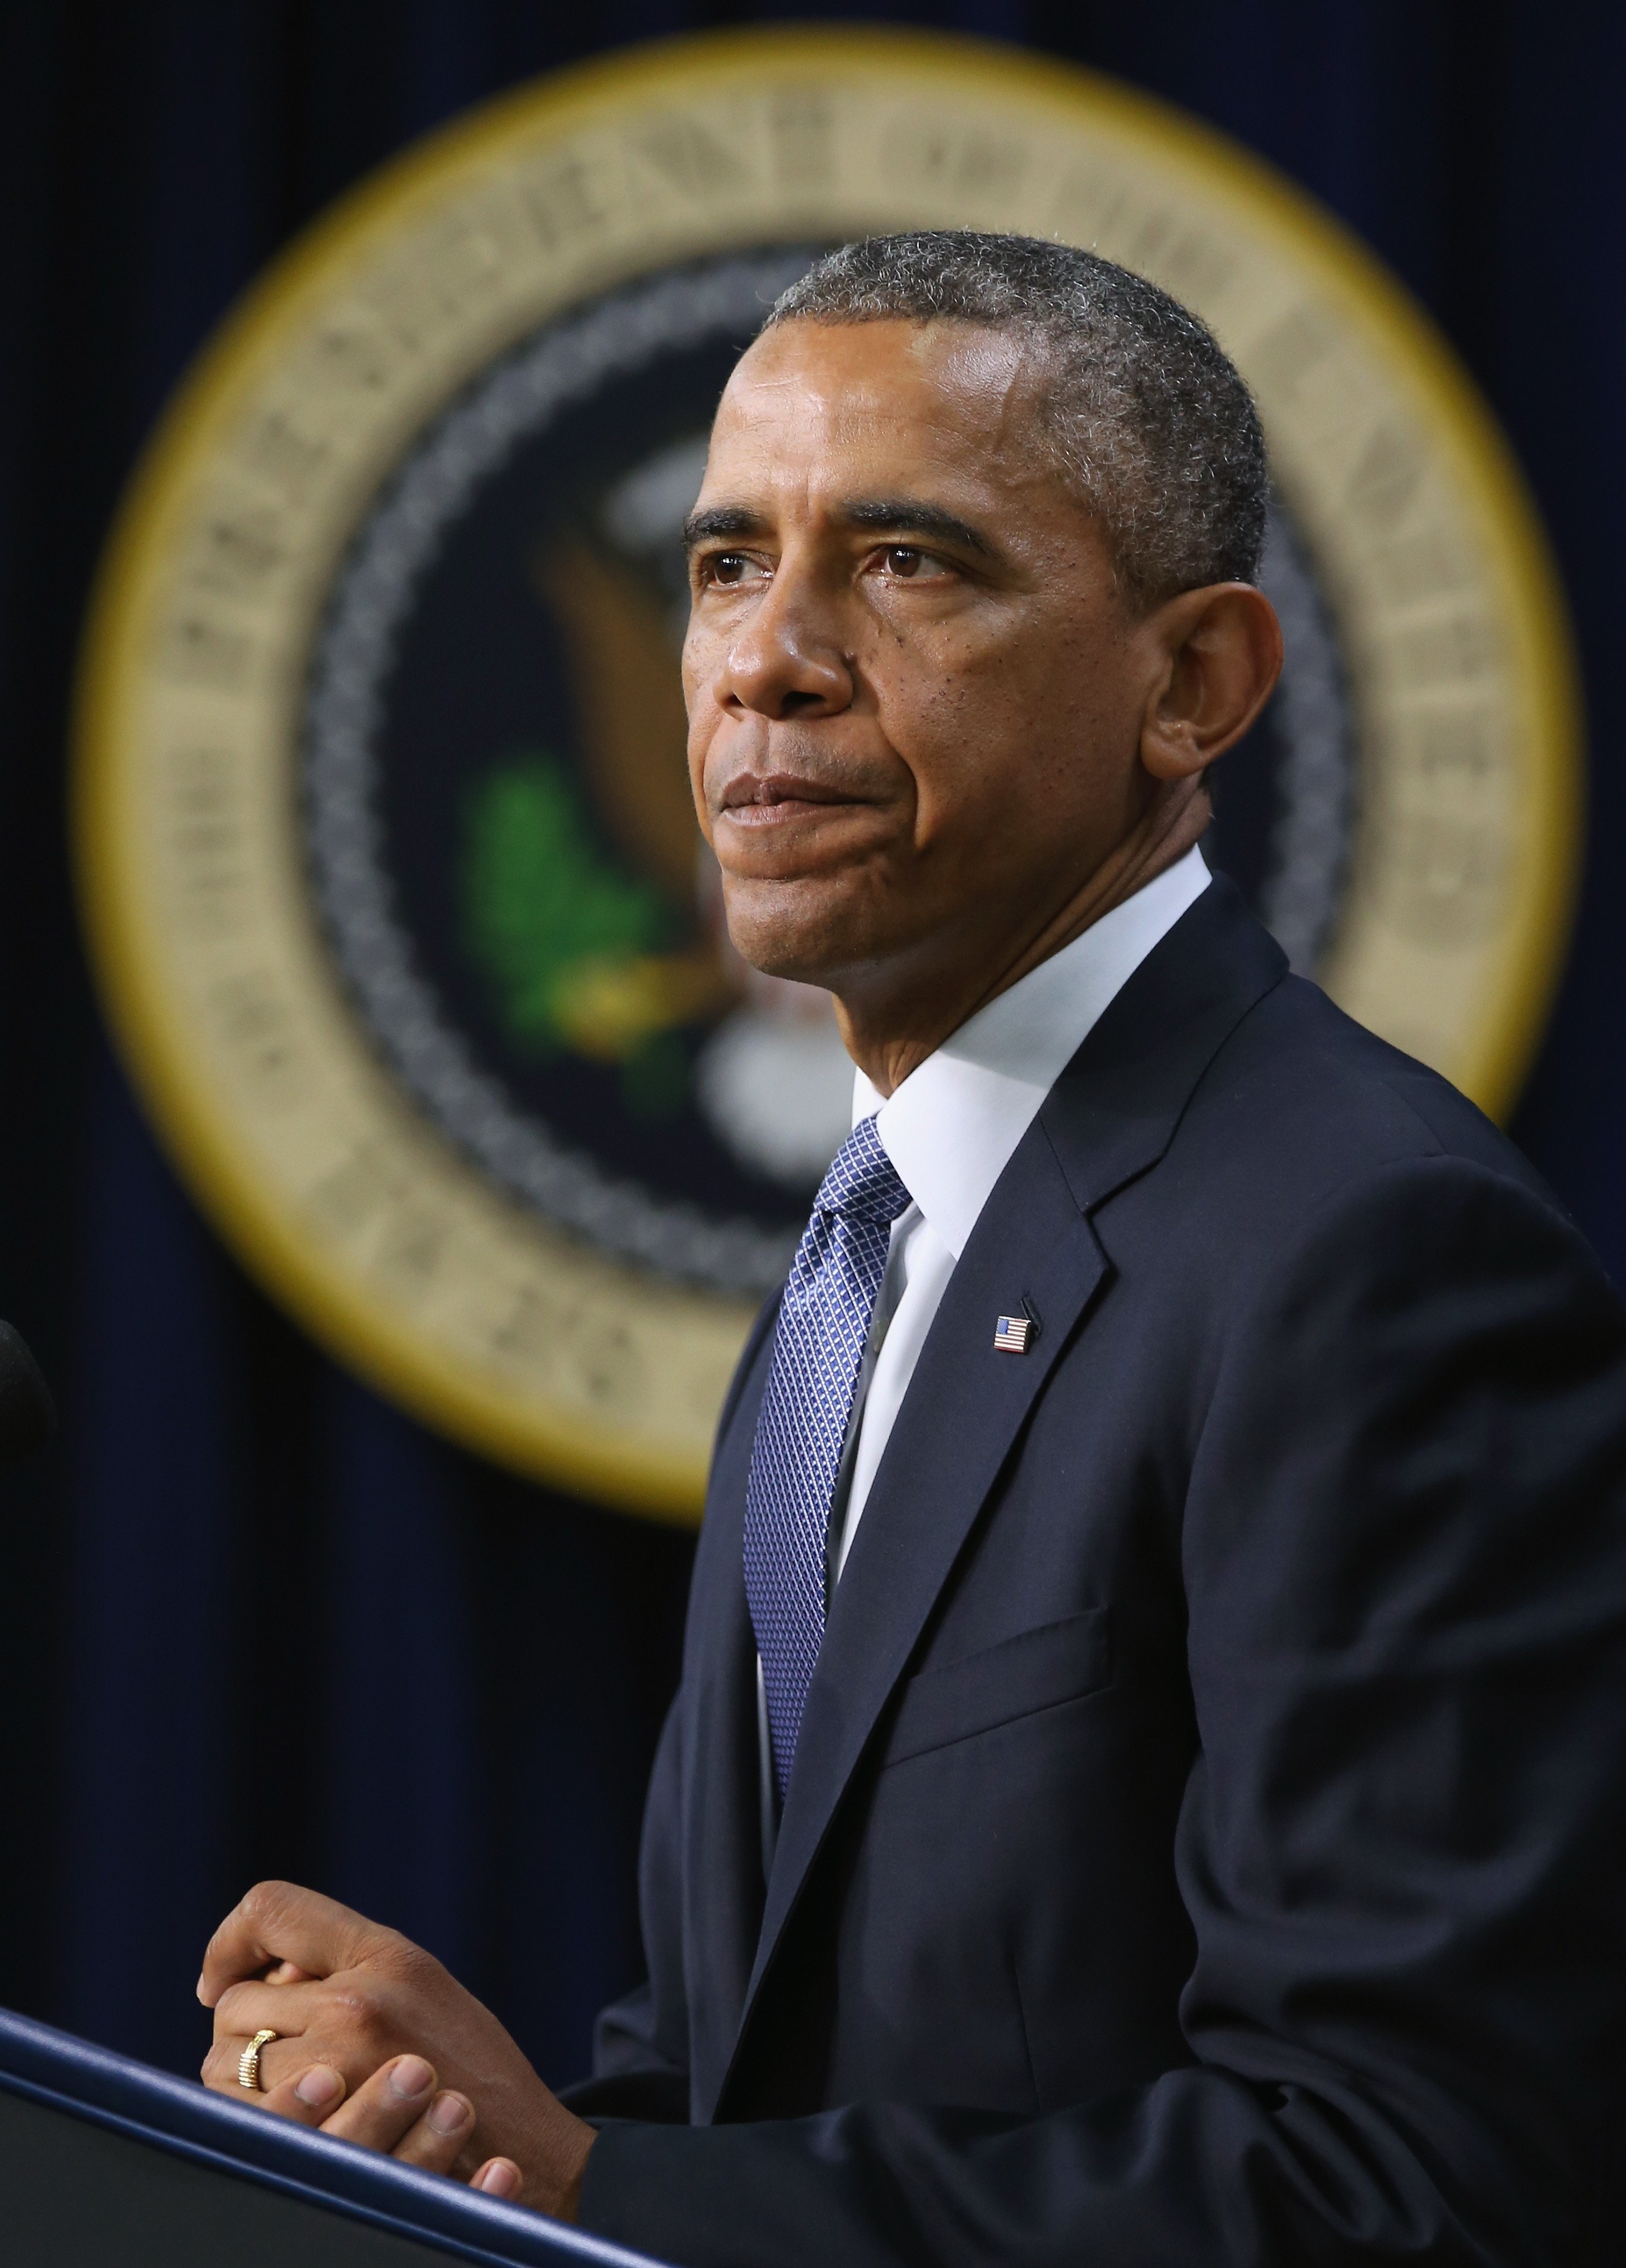 U.S. President Barack Obama speaks before signing the H.R. 803, the Workforce Innovation and Opportunity Act. during an event in the Eisonhower Executive Building, July 22, 2014 in Washington, DC. 